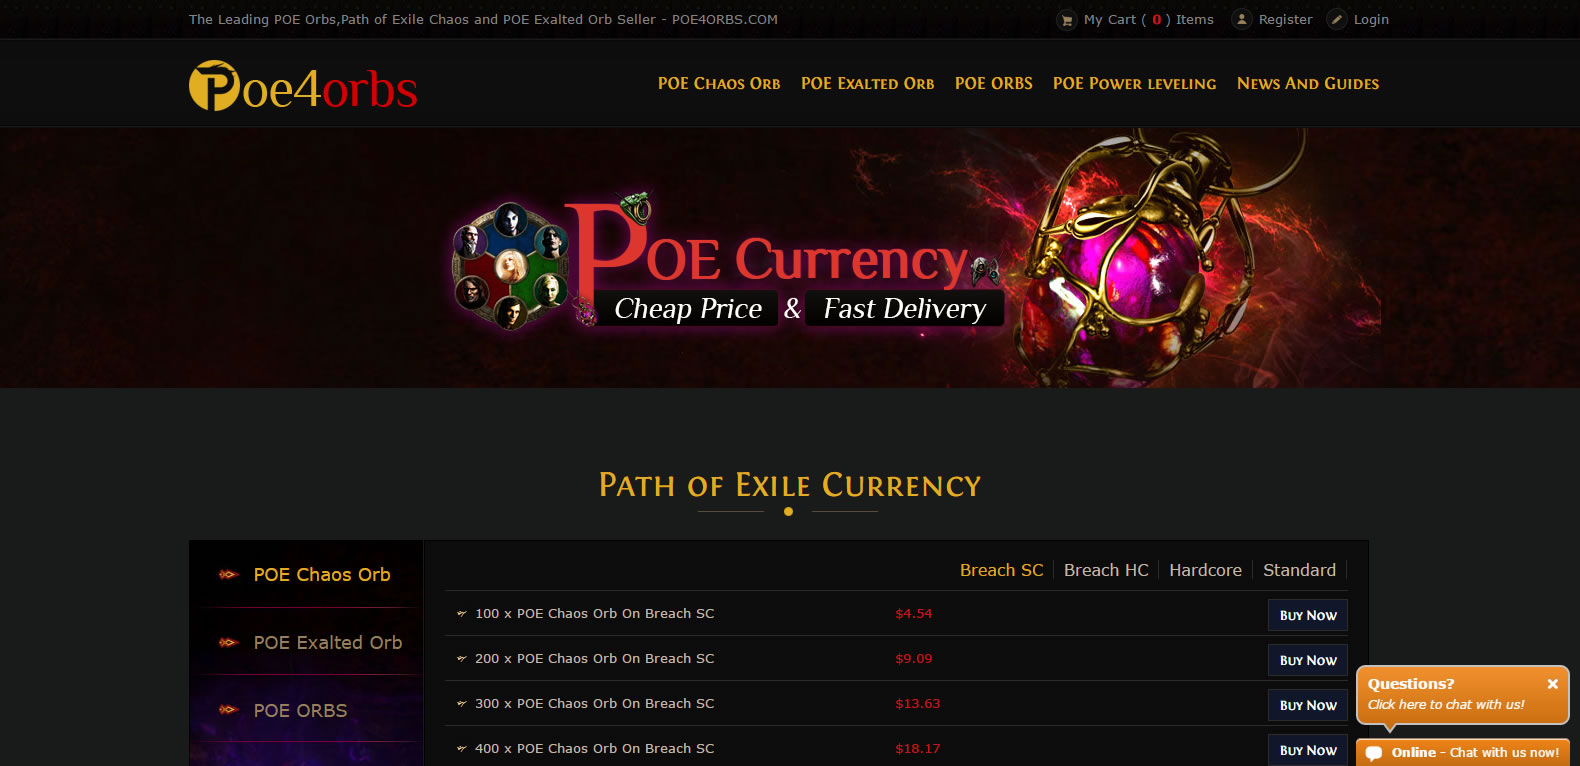 This poe4orbs website, be careful 